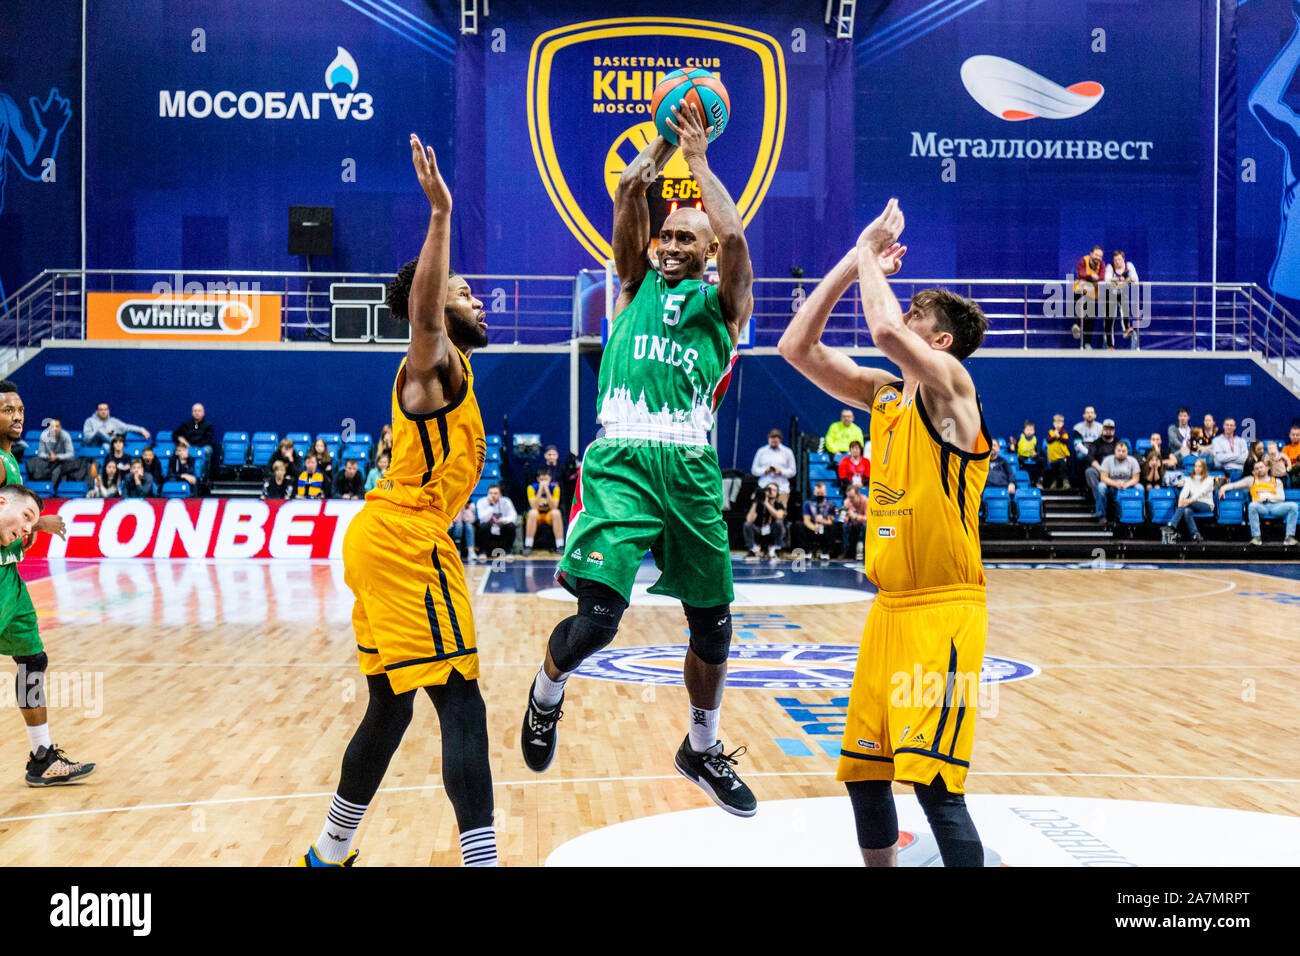 Jamar Smith, #15 of UNICS Kazan seen in action against Khimki Moscow during the Russian VTB United League between Khimki Moscow and UNICS Kazan.(Final score; Khimki Moscow 109:83 Russian VTB) Stock Photo